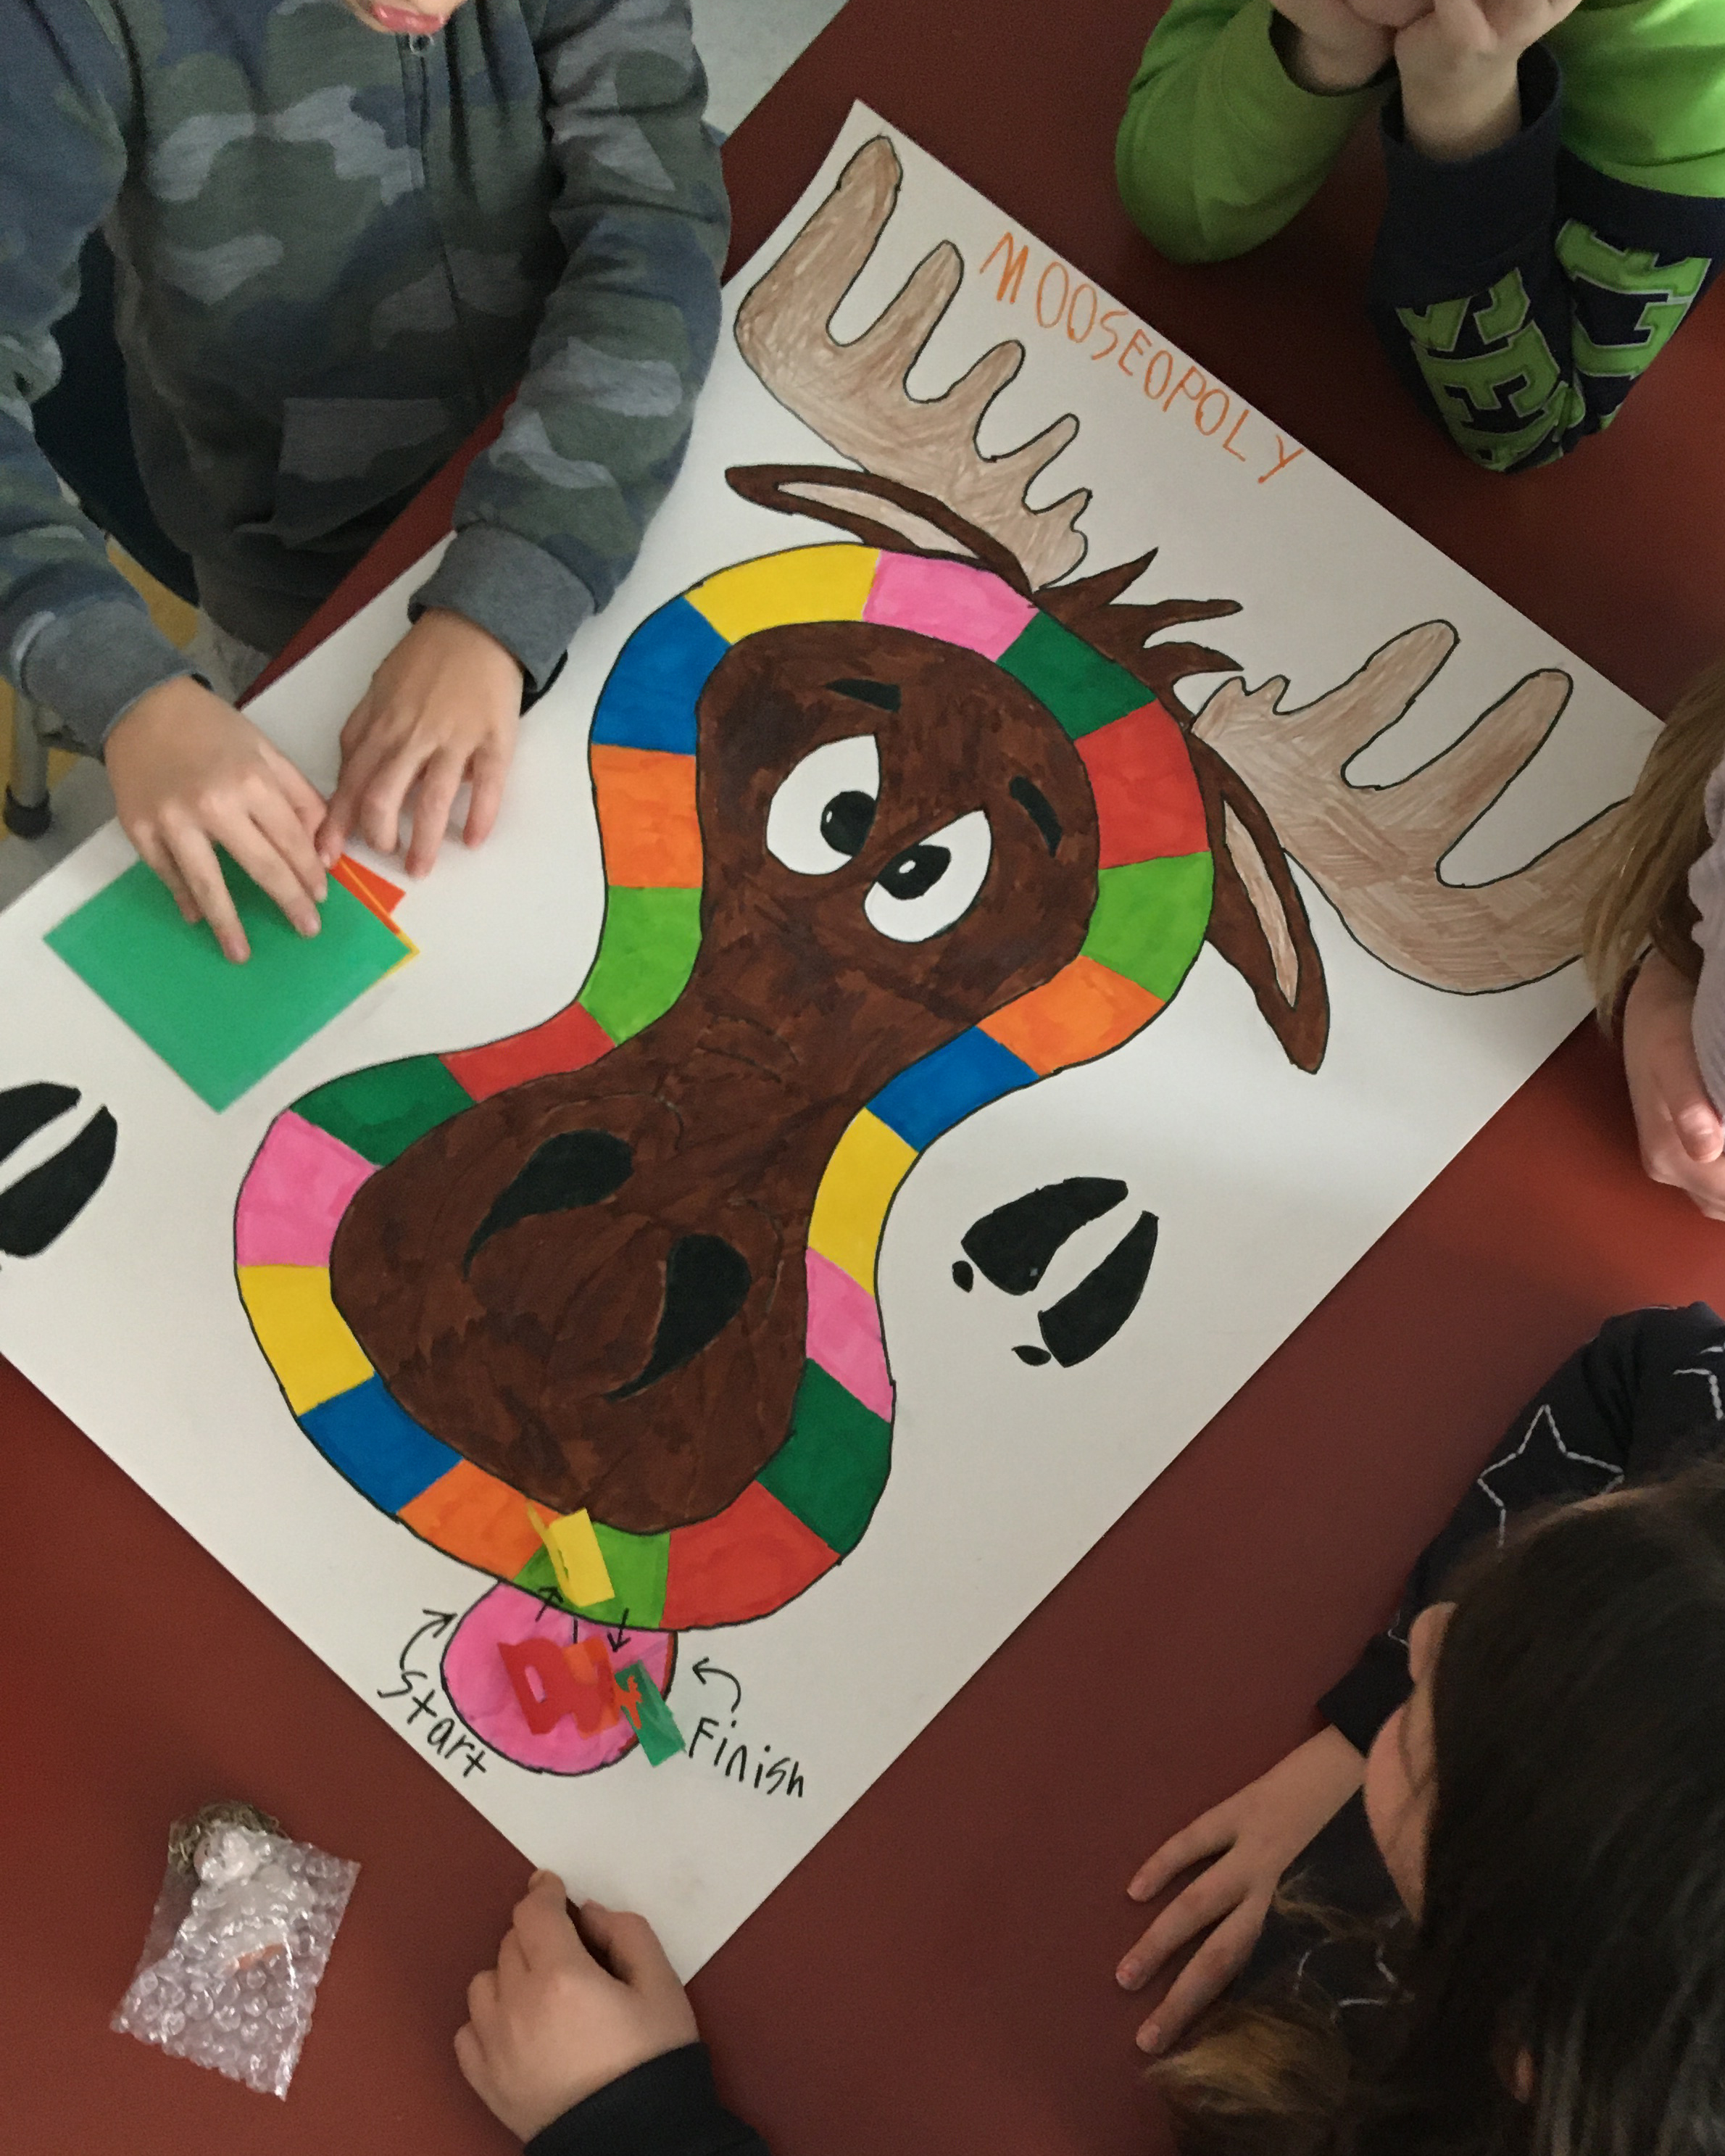 Students' hands shown as they play a student made board game in the shape of a moose.